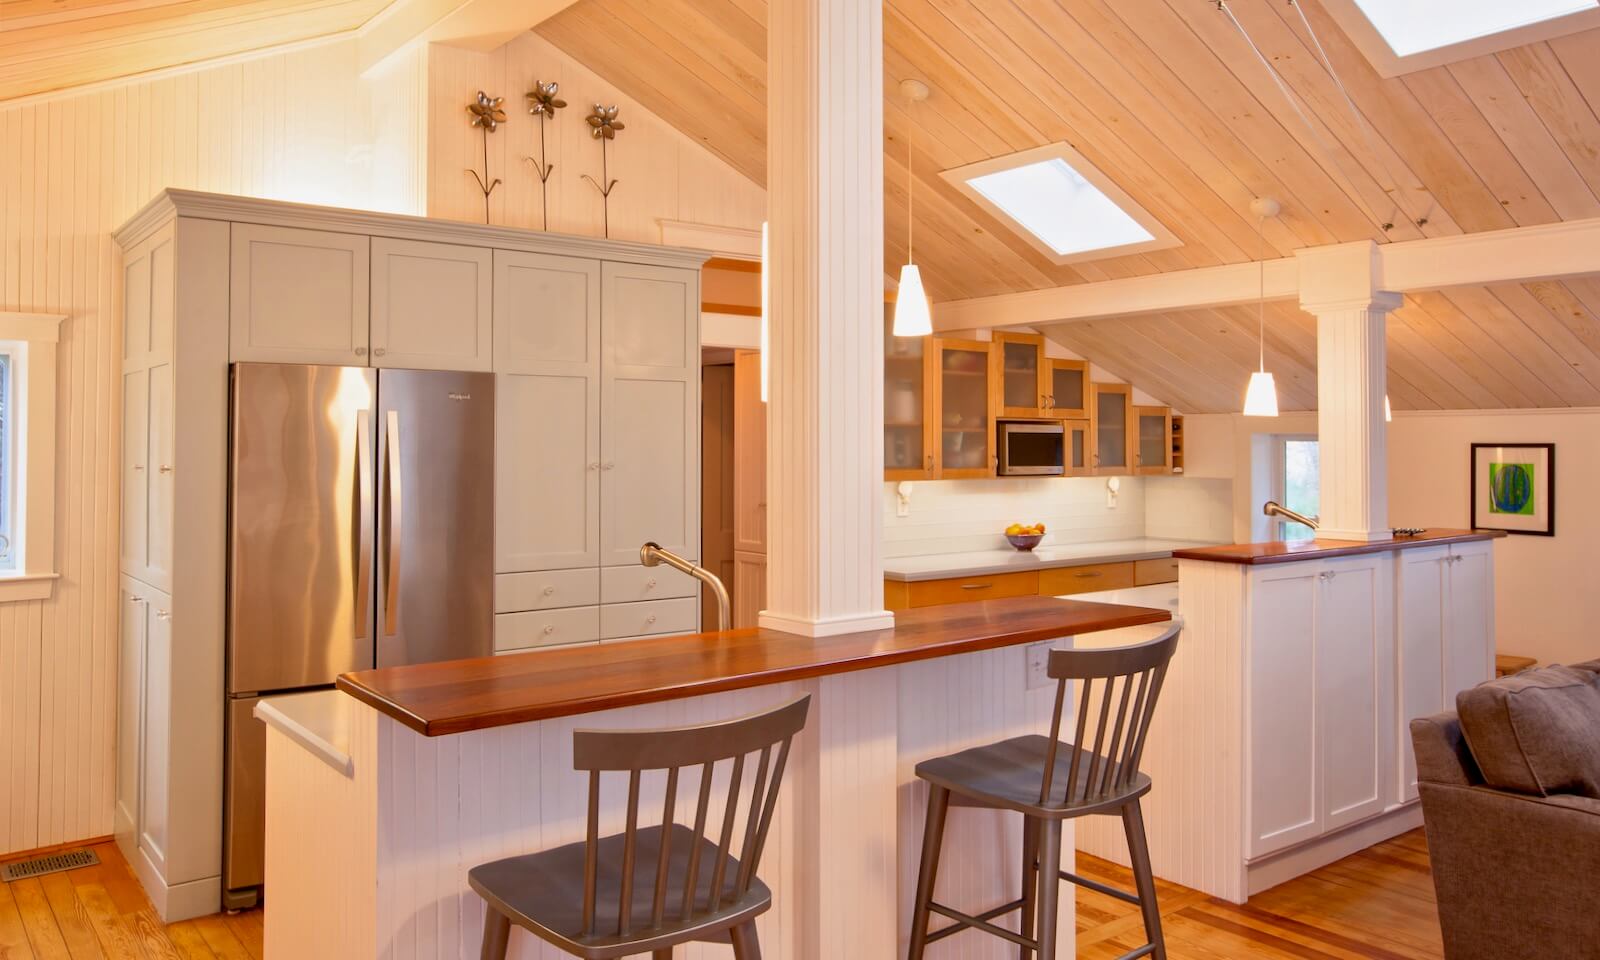 Modernist kitchen renovation with vaulted ceiling and custom cabinets by Duxbury MA design/build